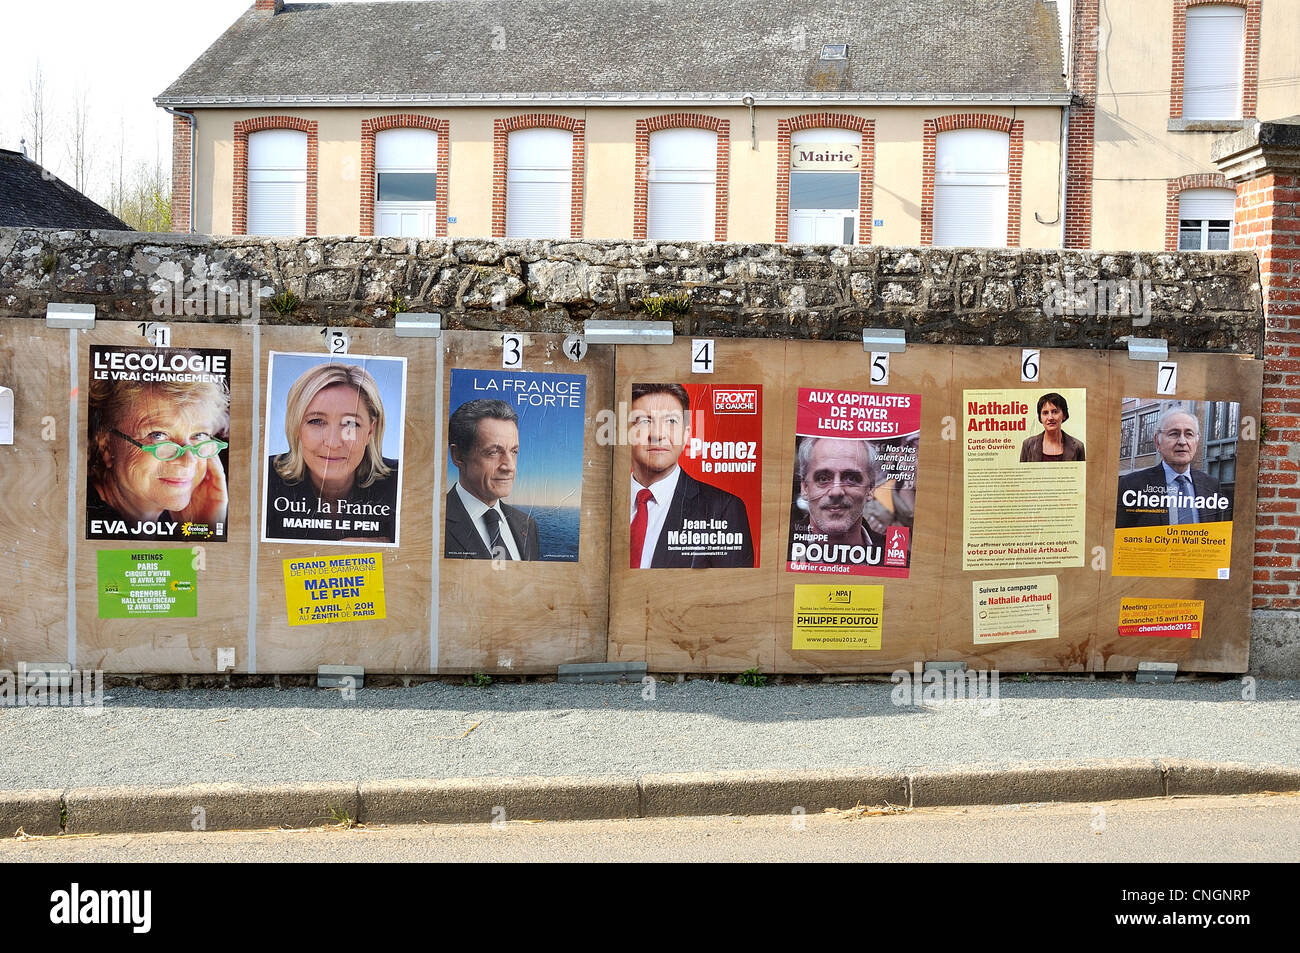 Elections of the President of the Republic in France, posters of the candidates for the first round. Stock Photo